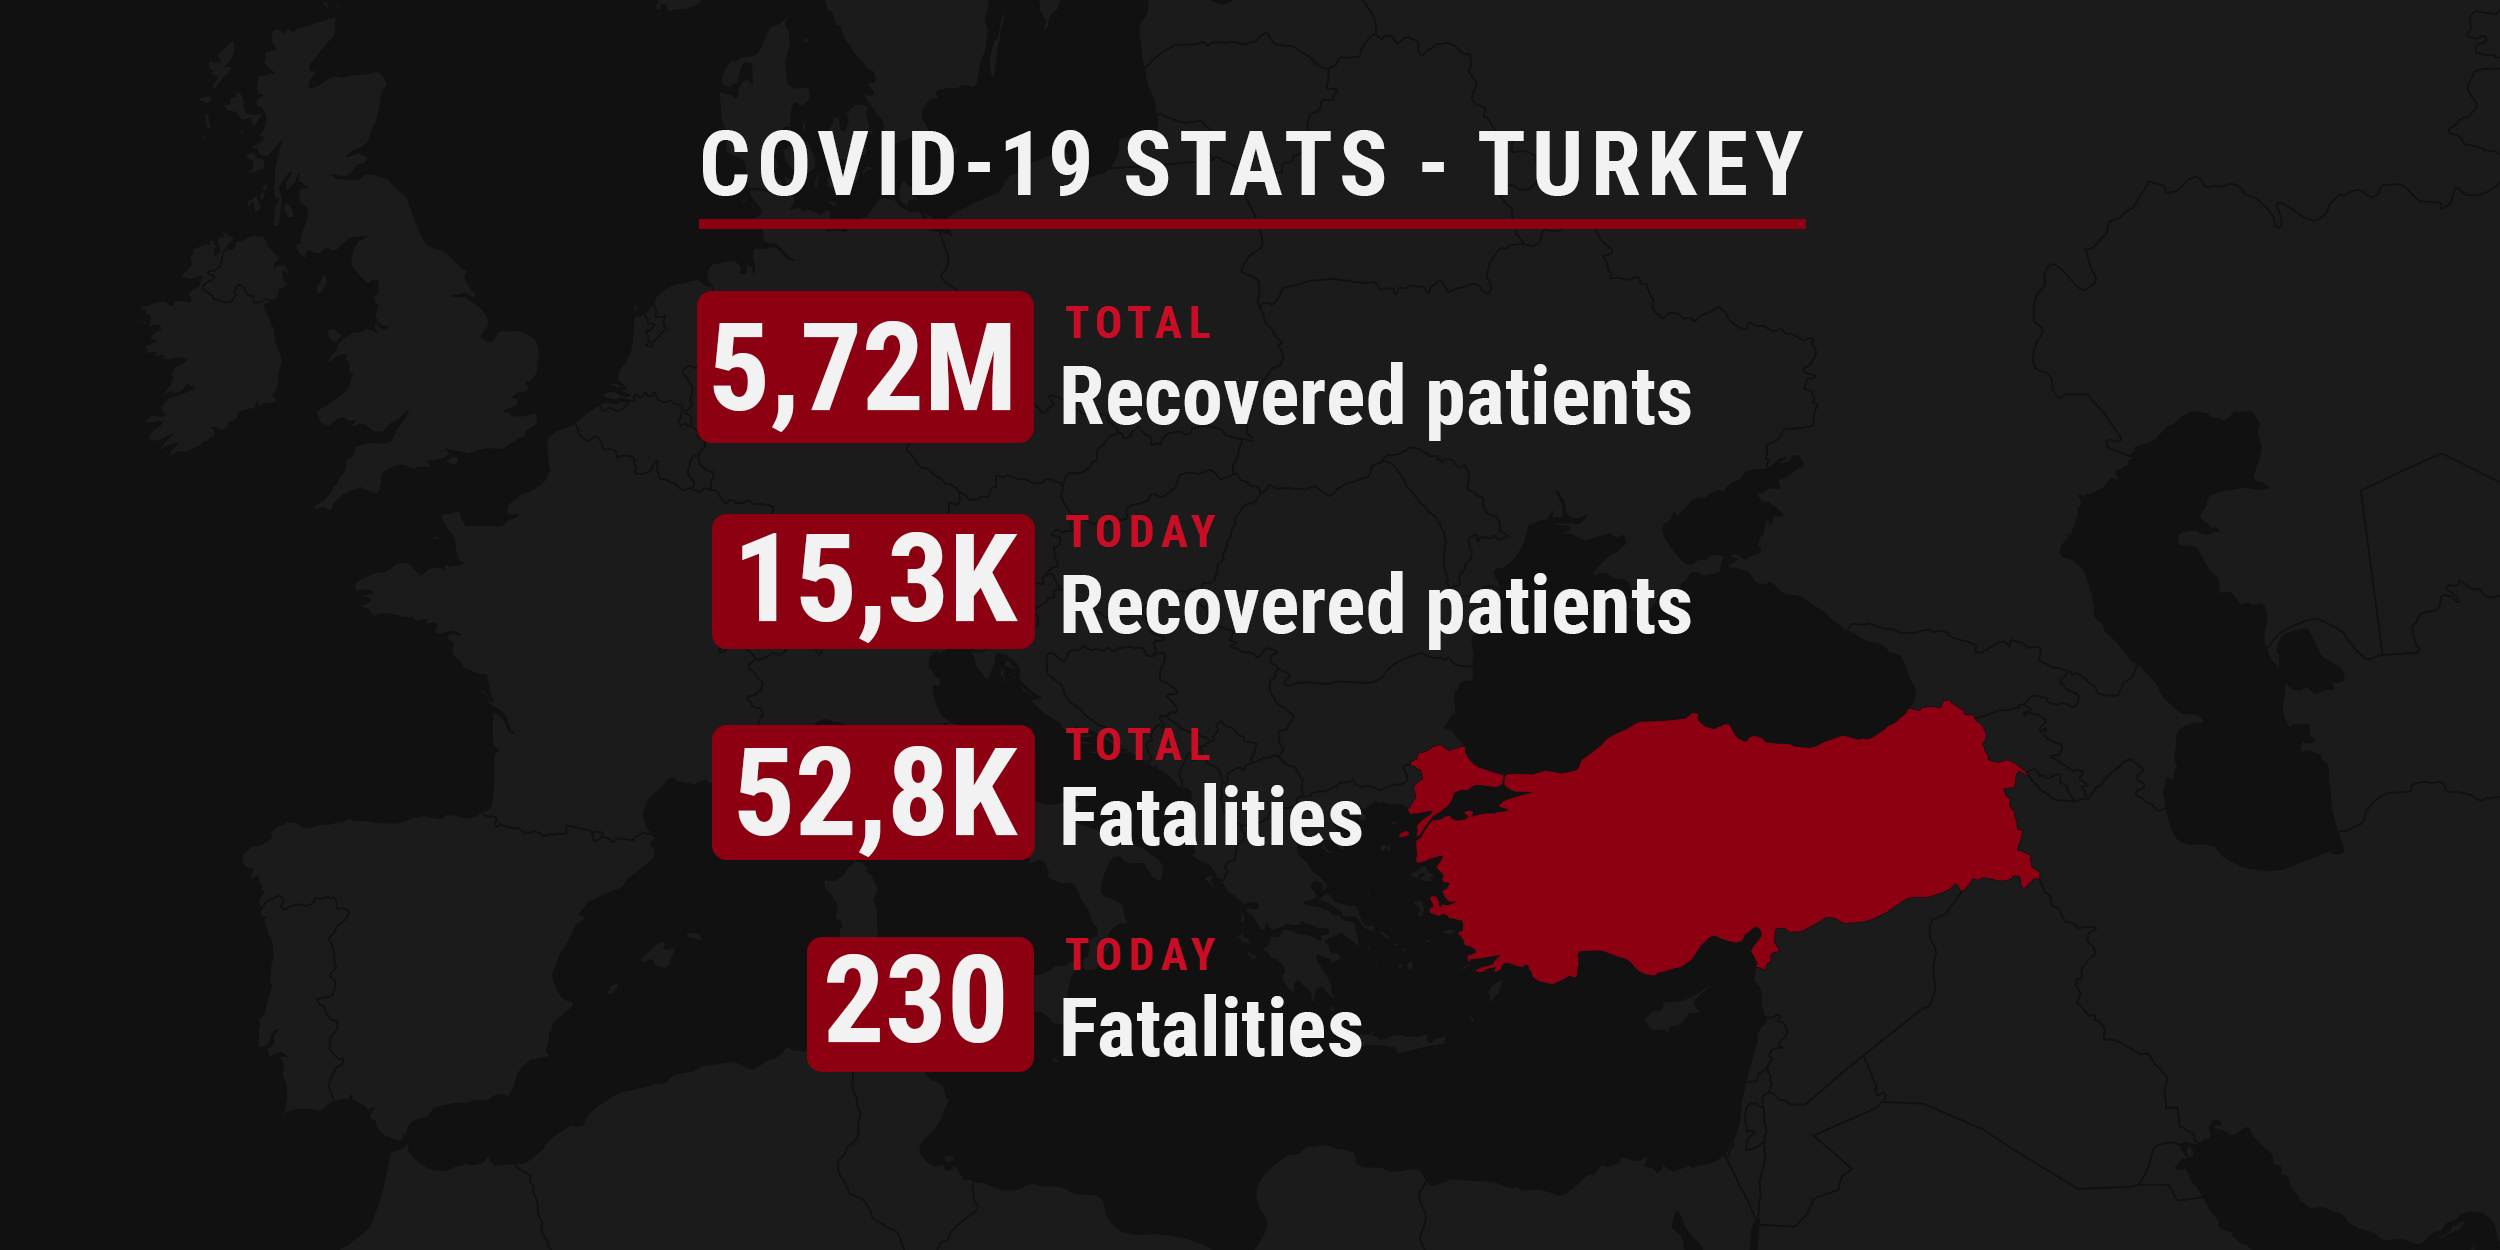 Number of recovered and deceased COVID-19 patients in Turkey